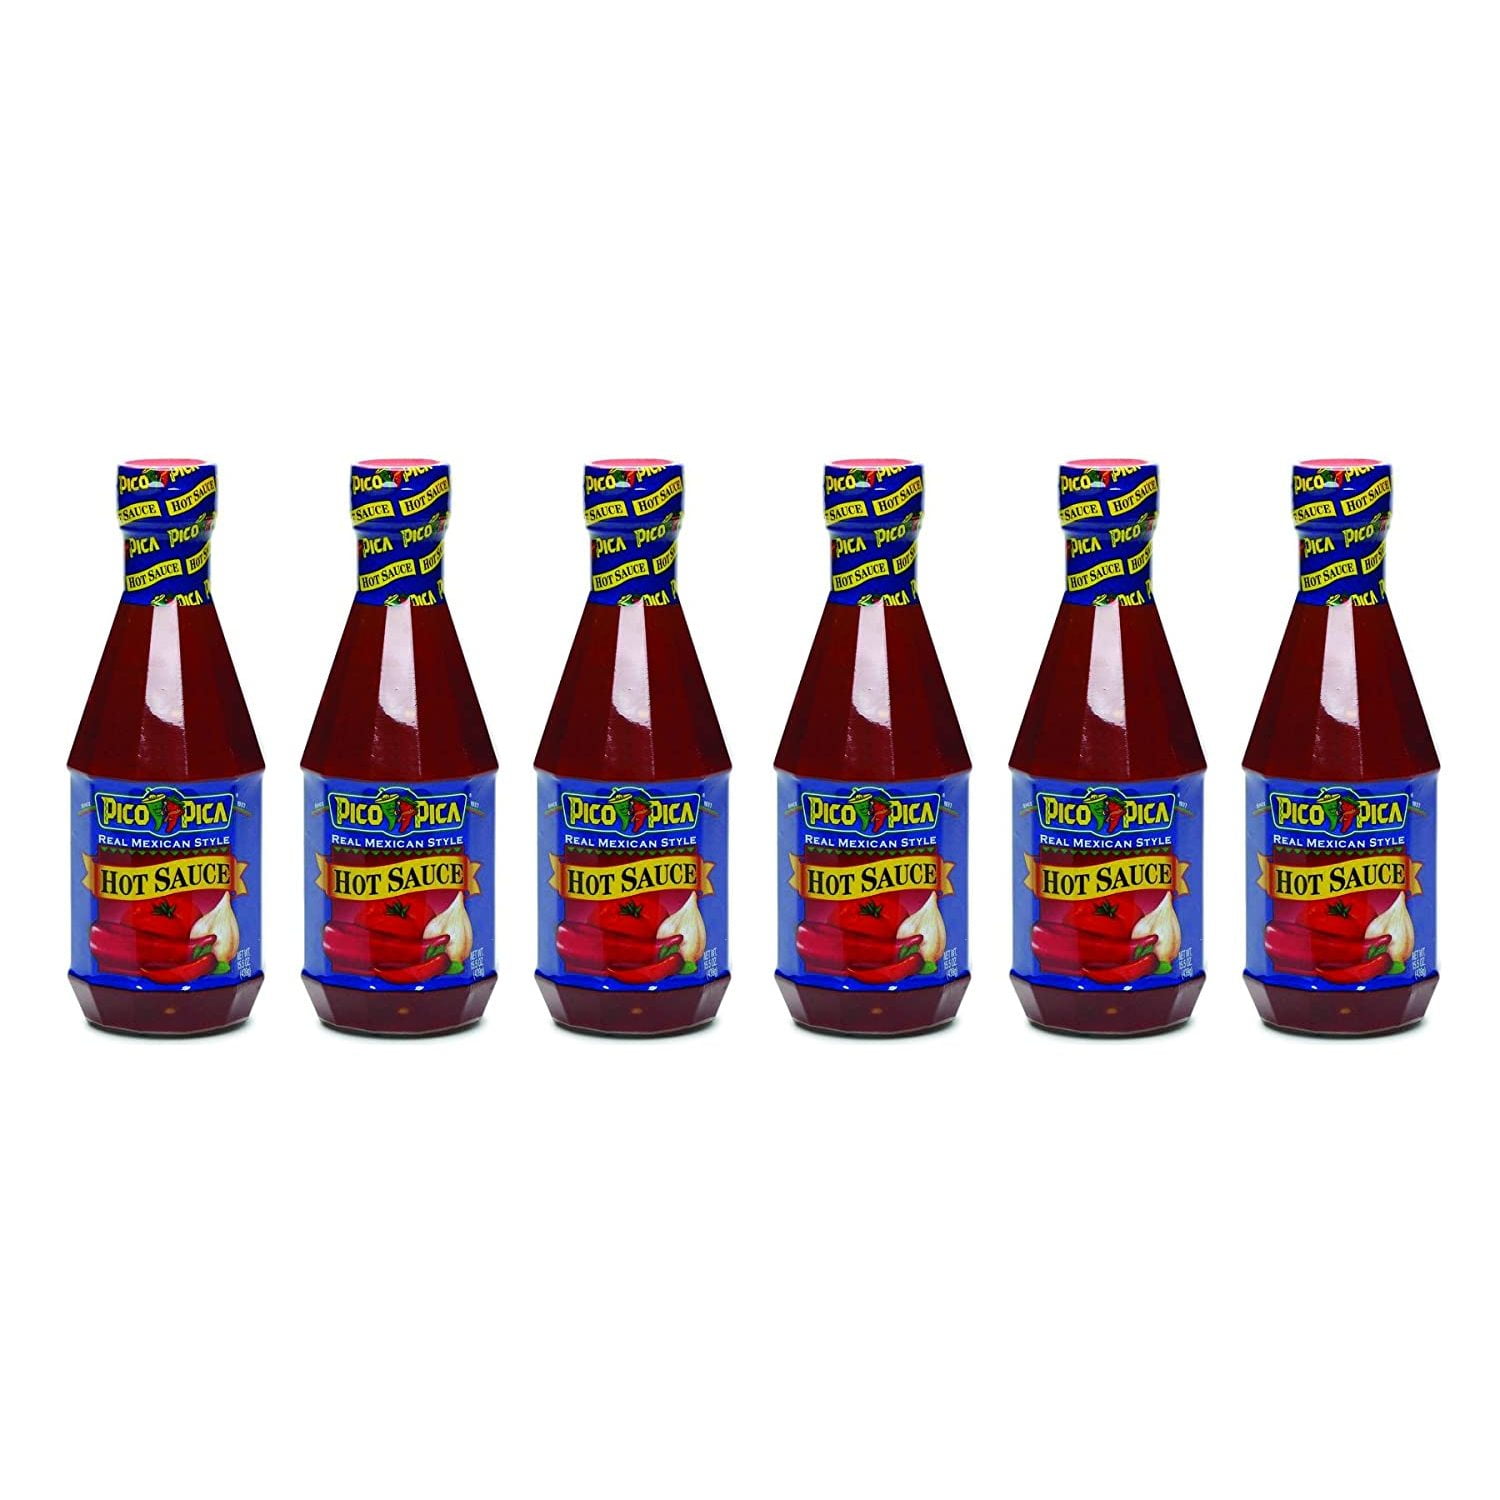 Pico Pica Mexican Hot Sauce 7 oz (Pack of 3)